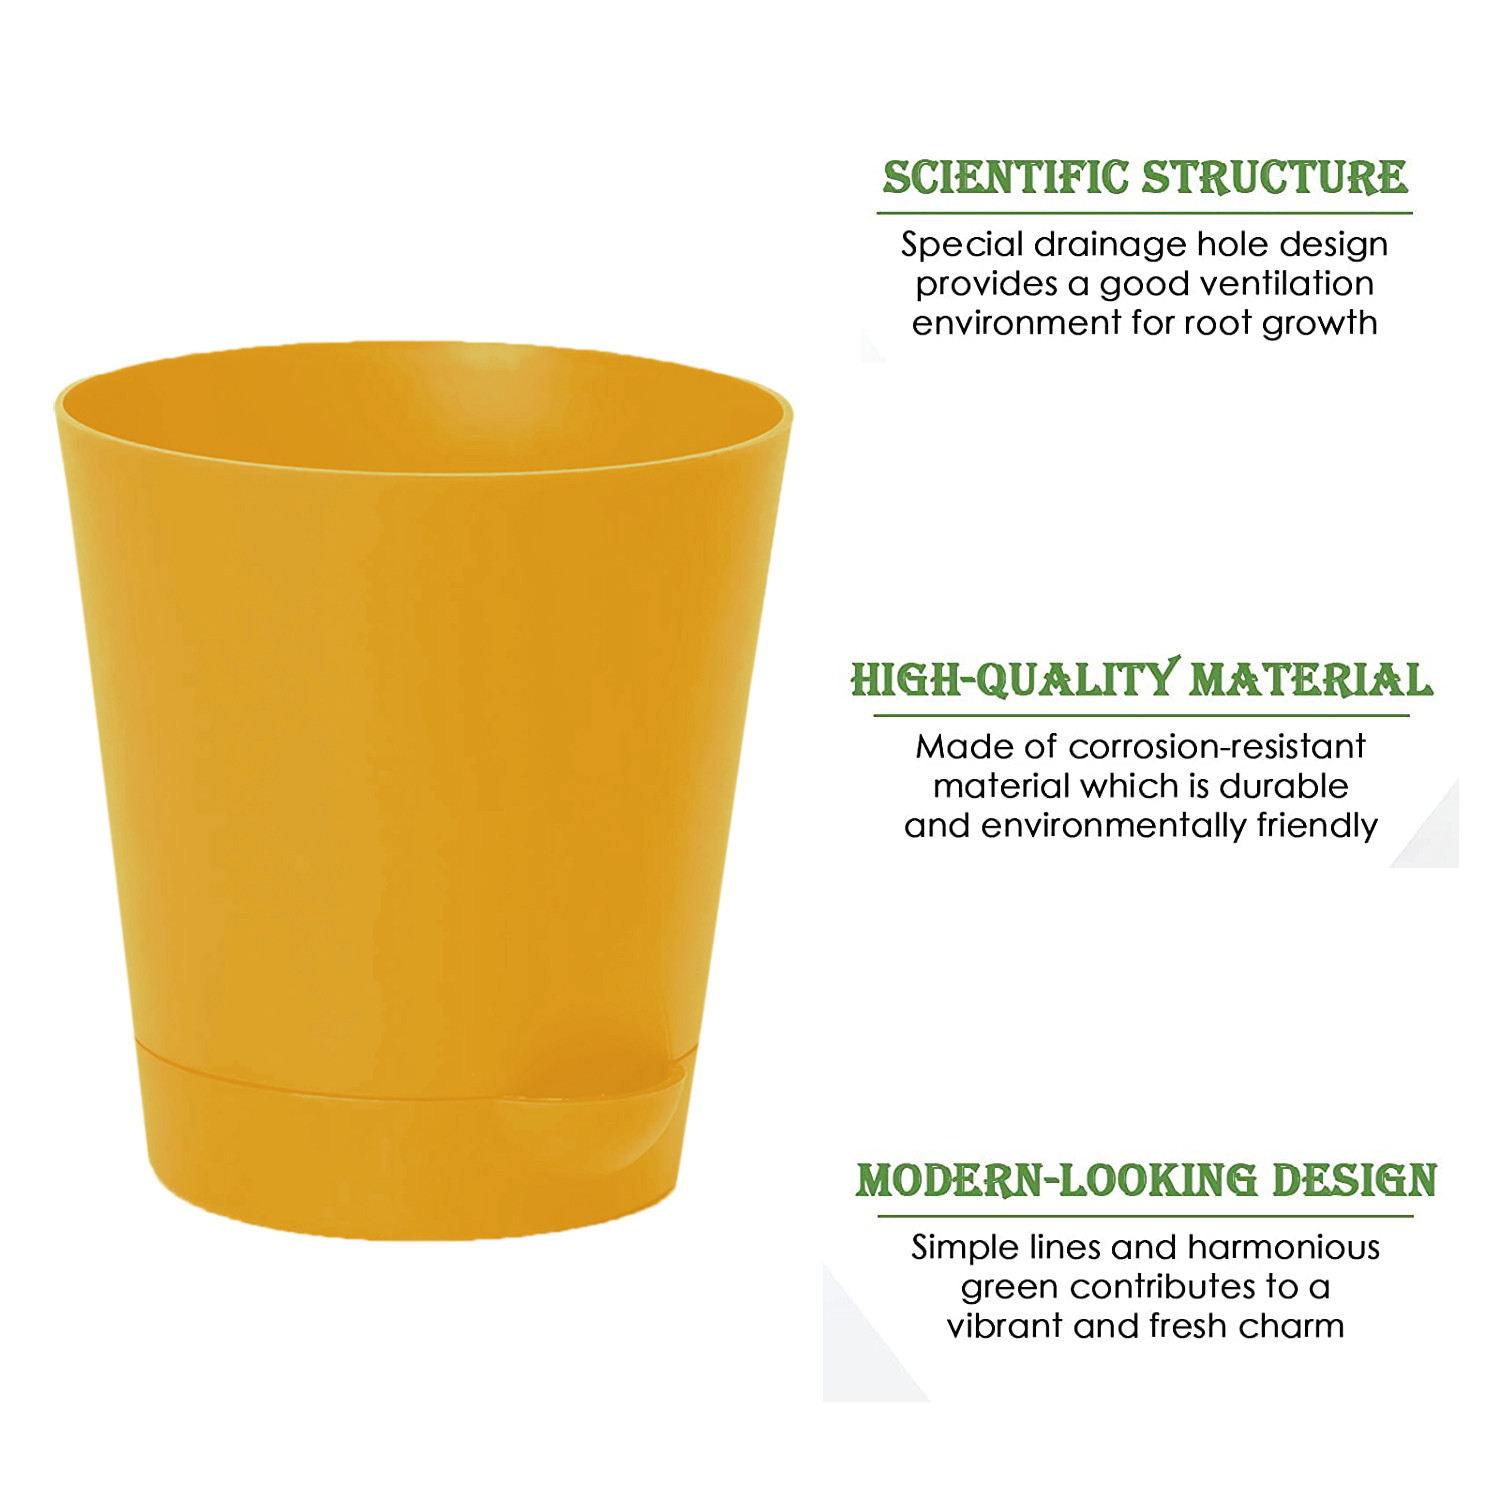 Kuber Industries Plastic Titan Pot|Garden Container For Plants & Flowers|Self-Watering Pot With Drainage Holes,6 Inch (Yellow)